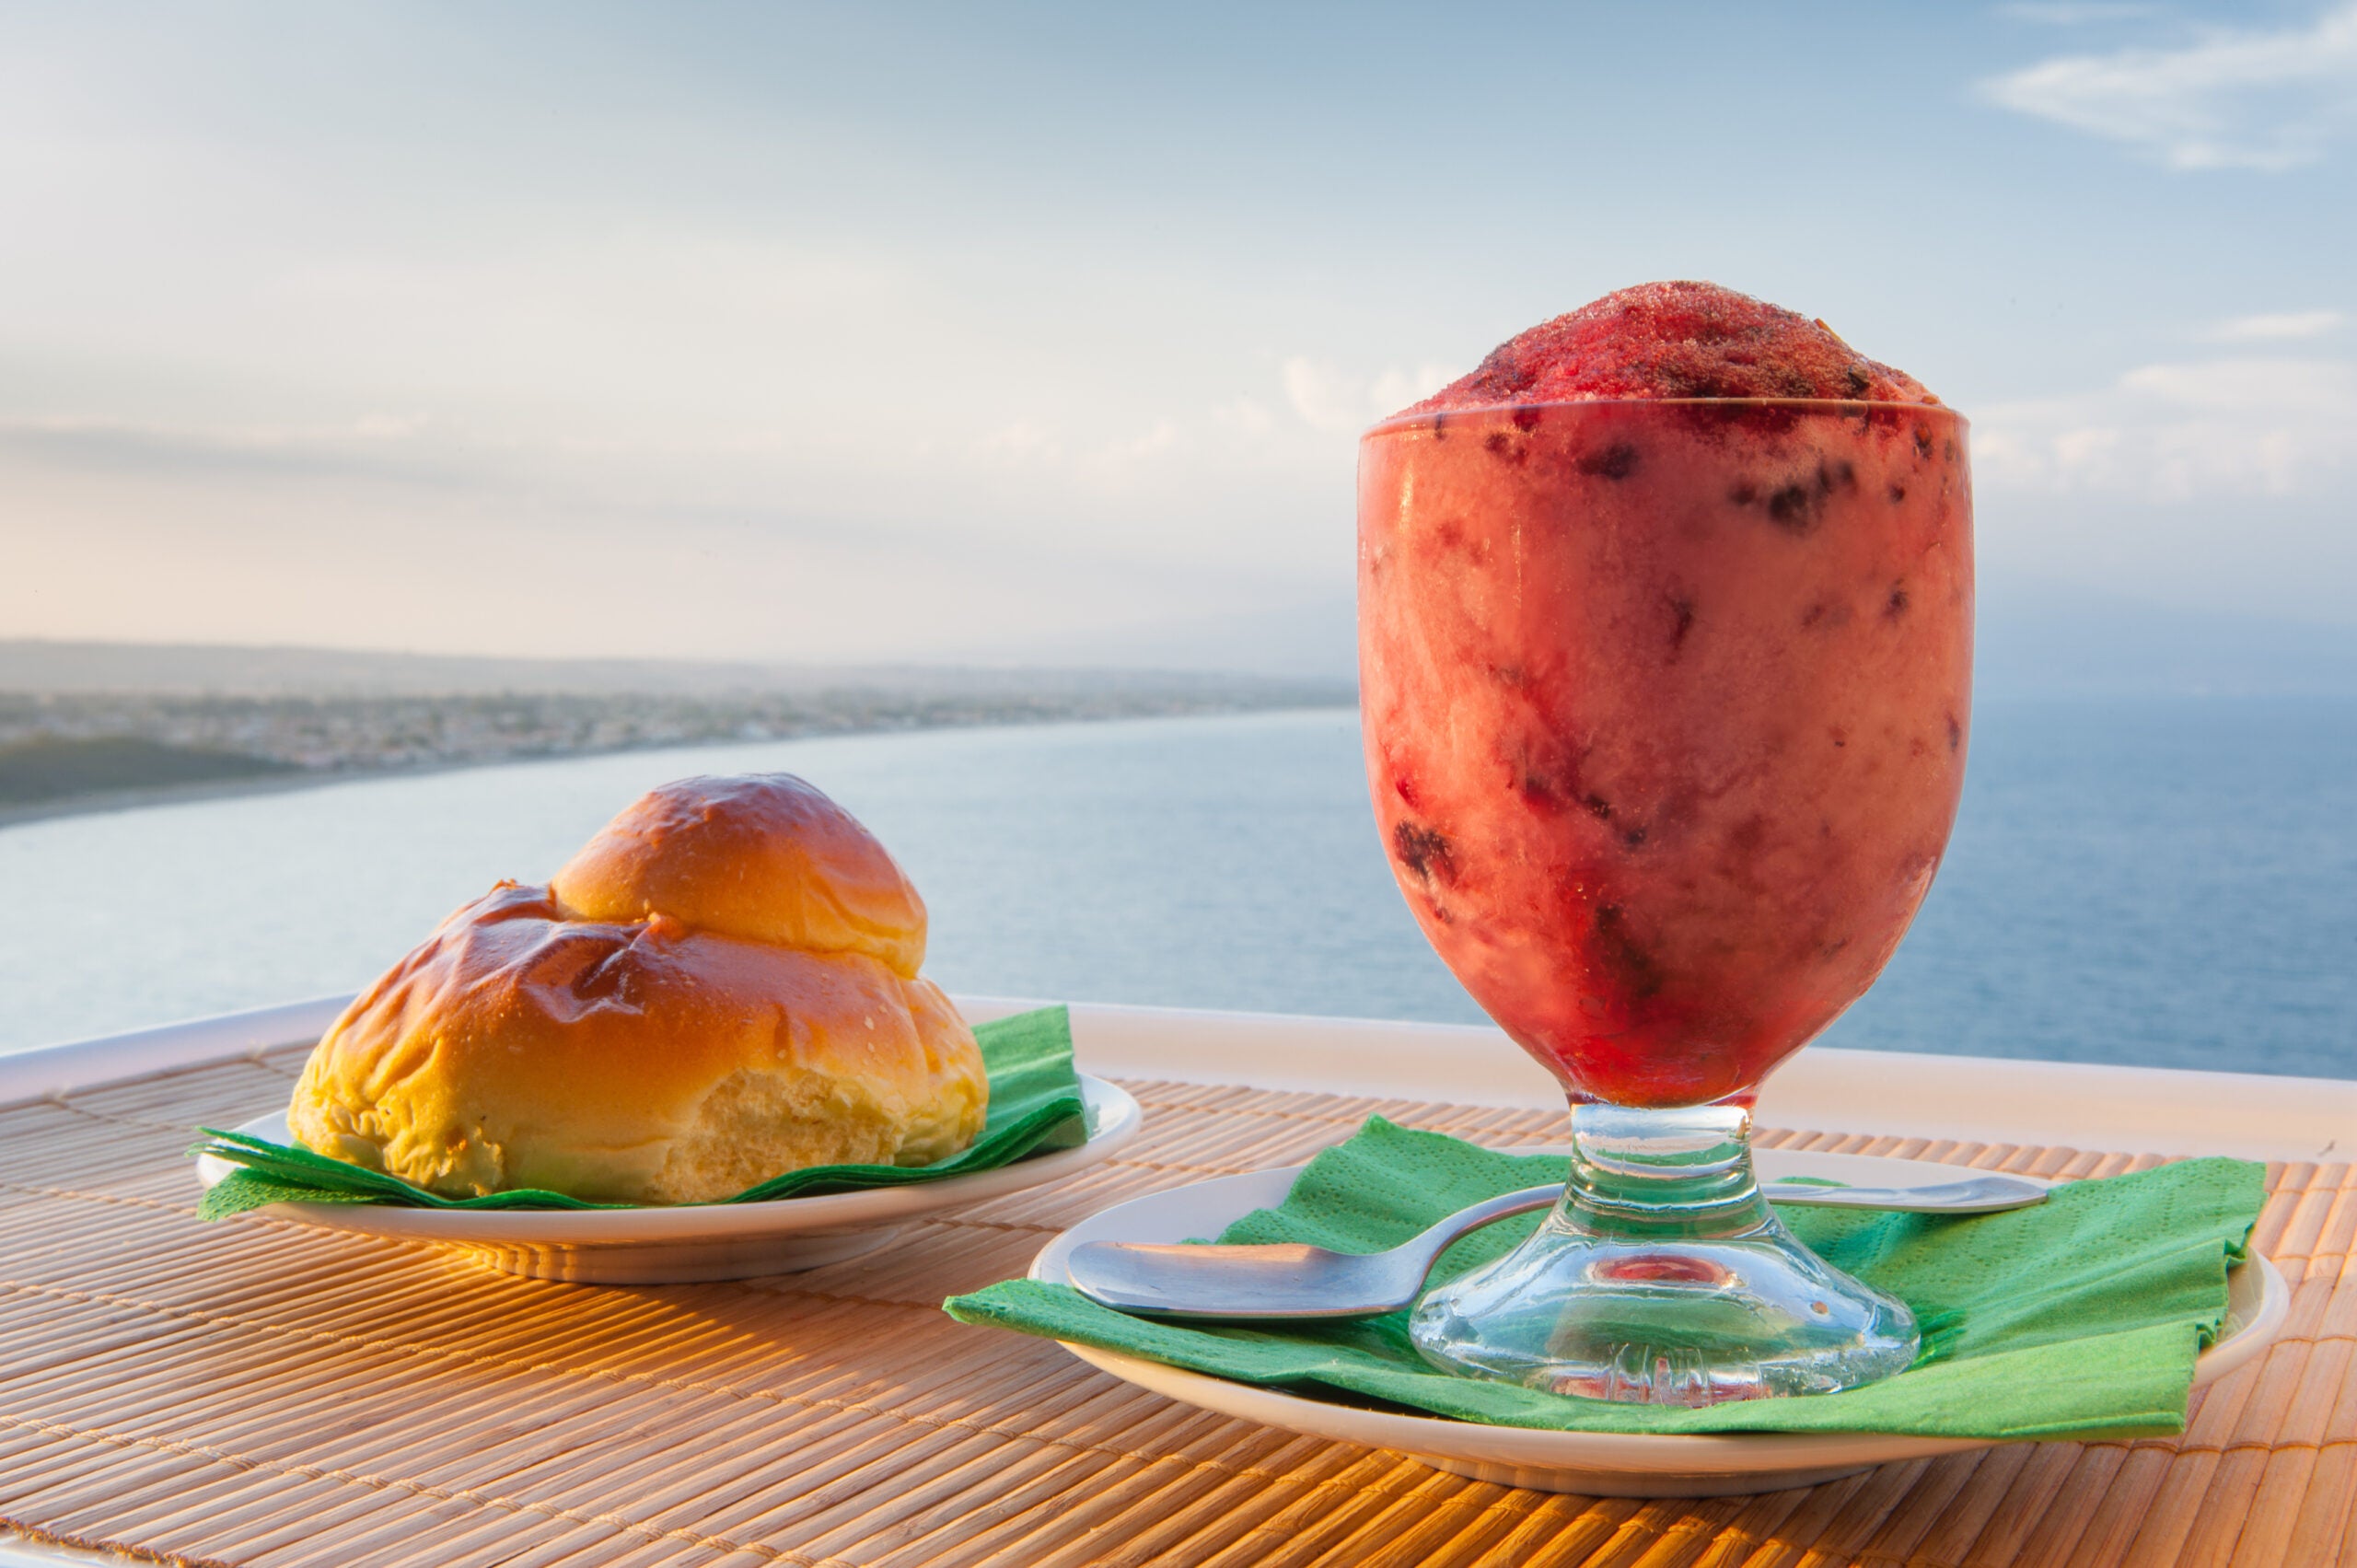 Granita and brioche with Mount Etna in background